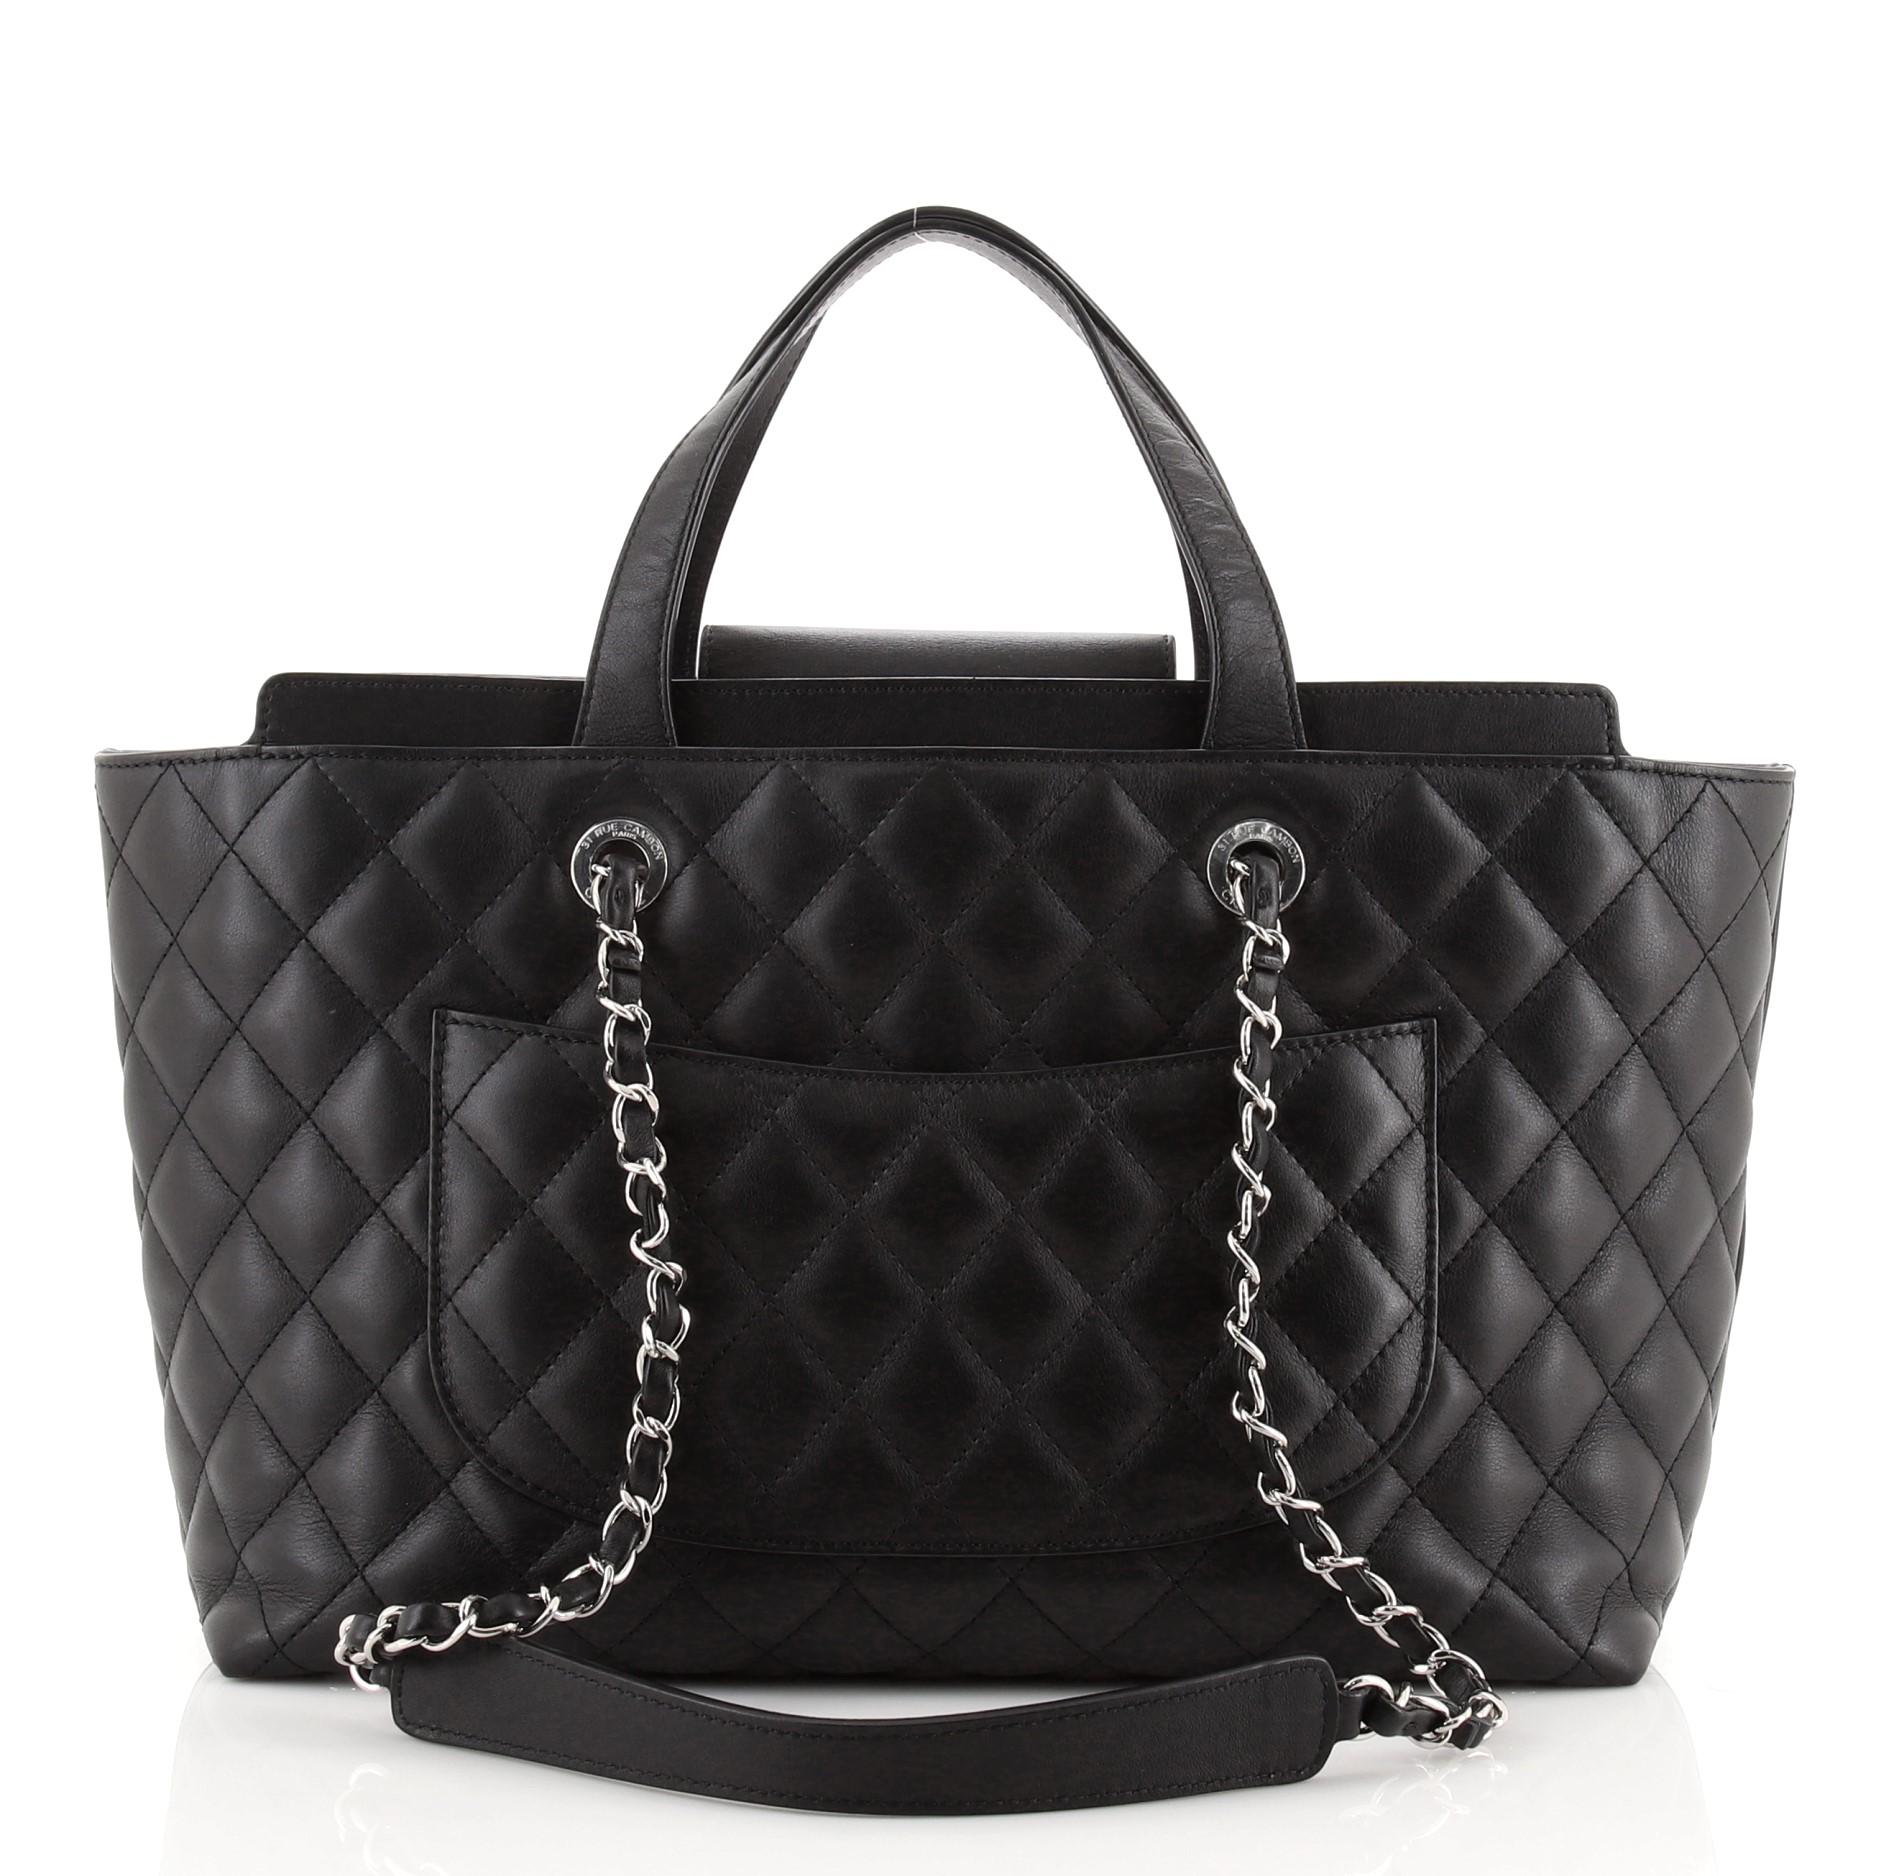 Black Chanel Shopping Tote Quilted Calfskin Medium